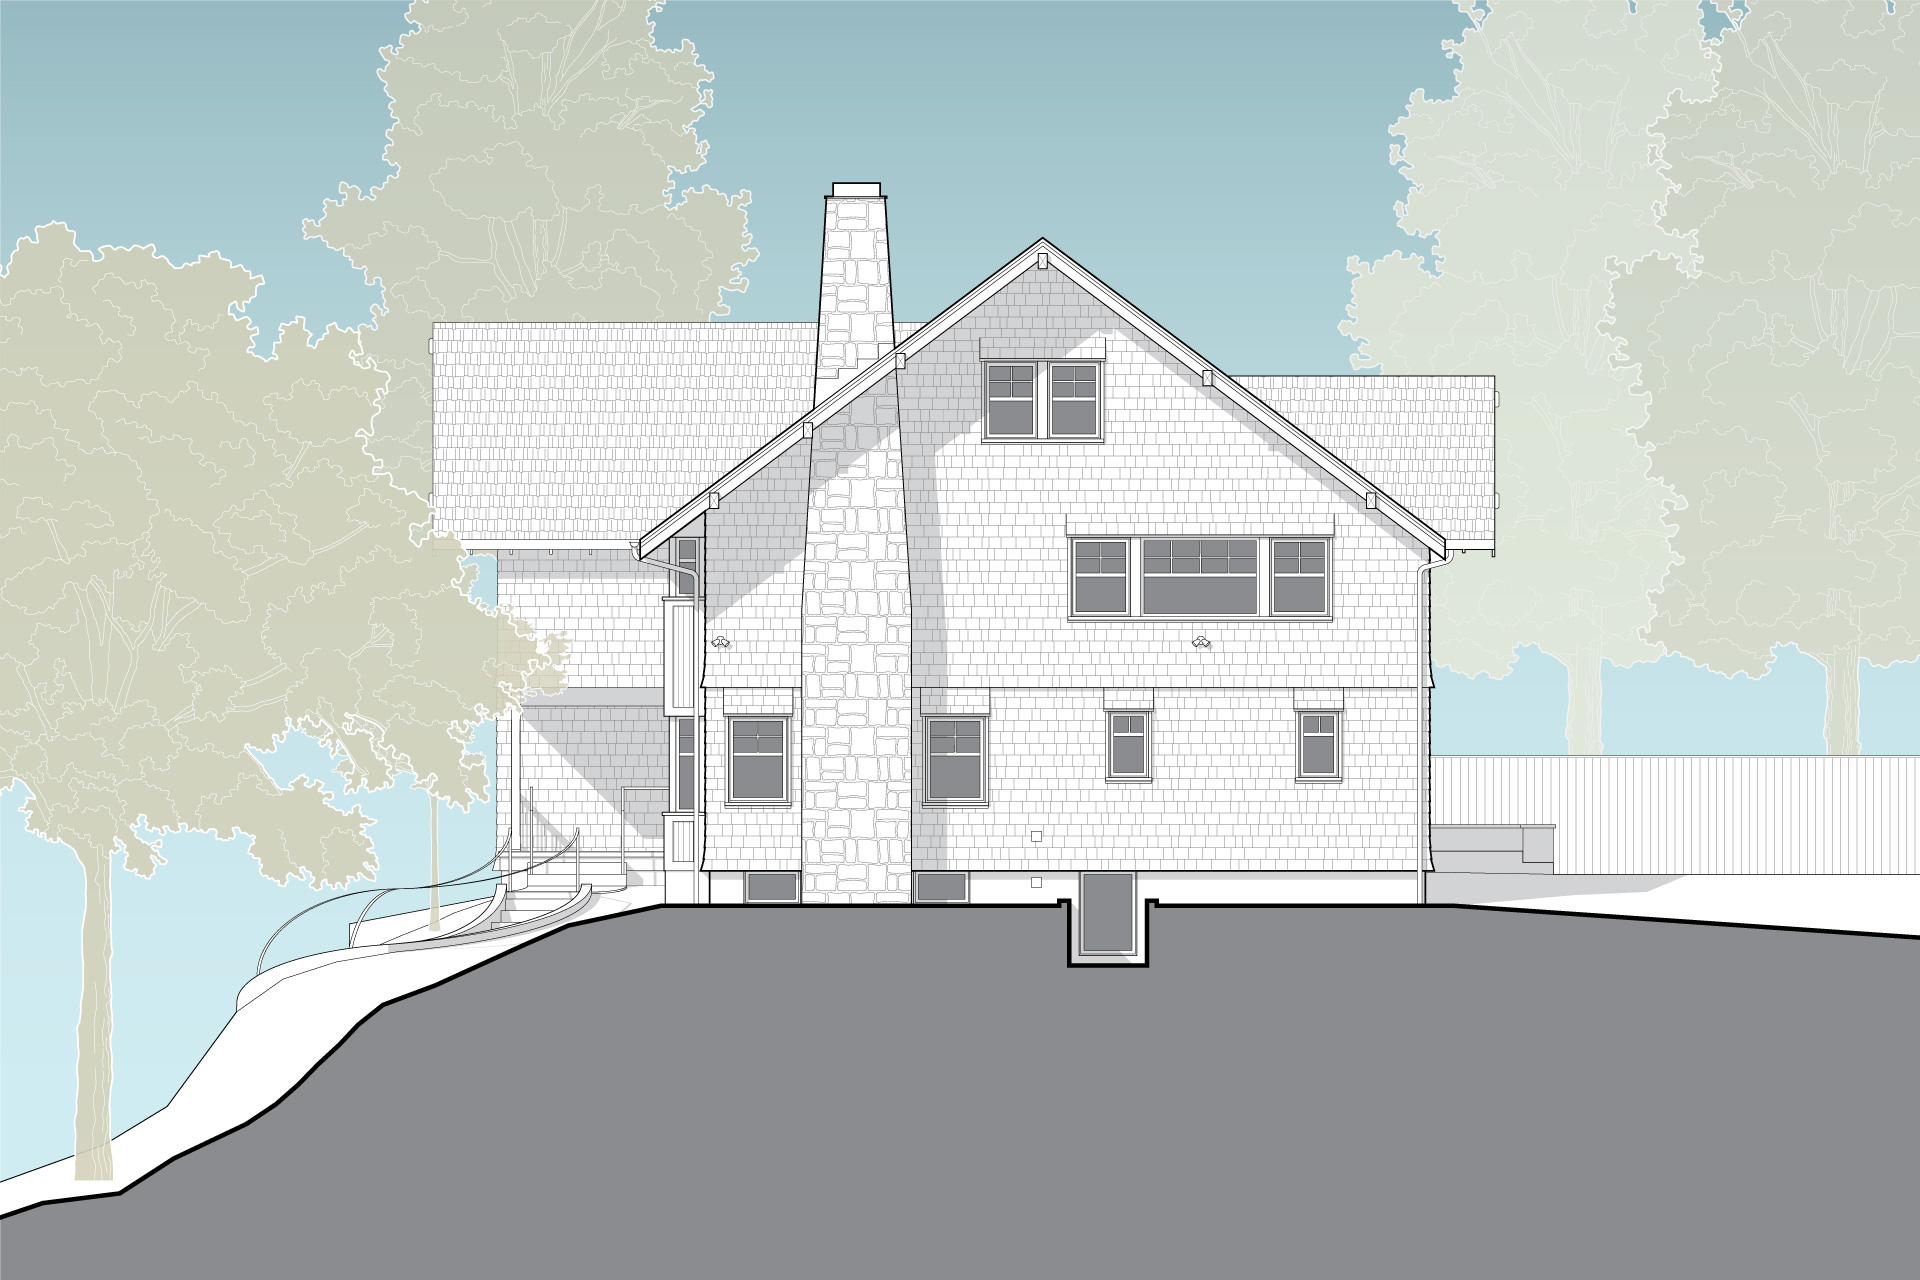 This is a drawing of the side of the Hillside House after renovations.